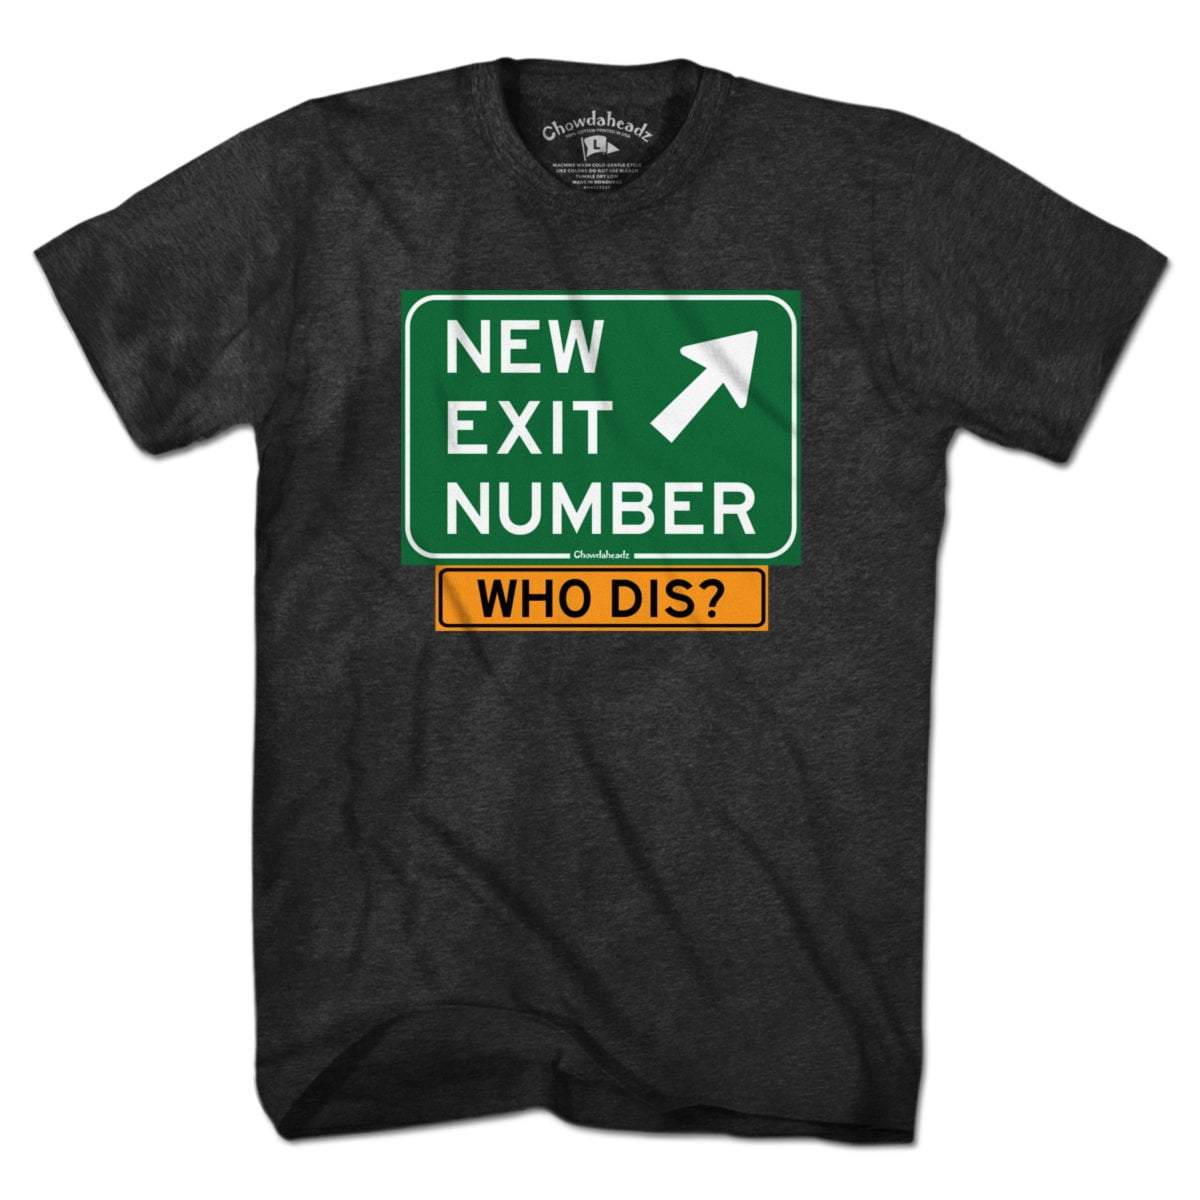 New Exit Number Who Dis? Sign T-Shirt - Chowdaheadz